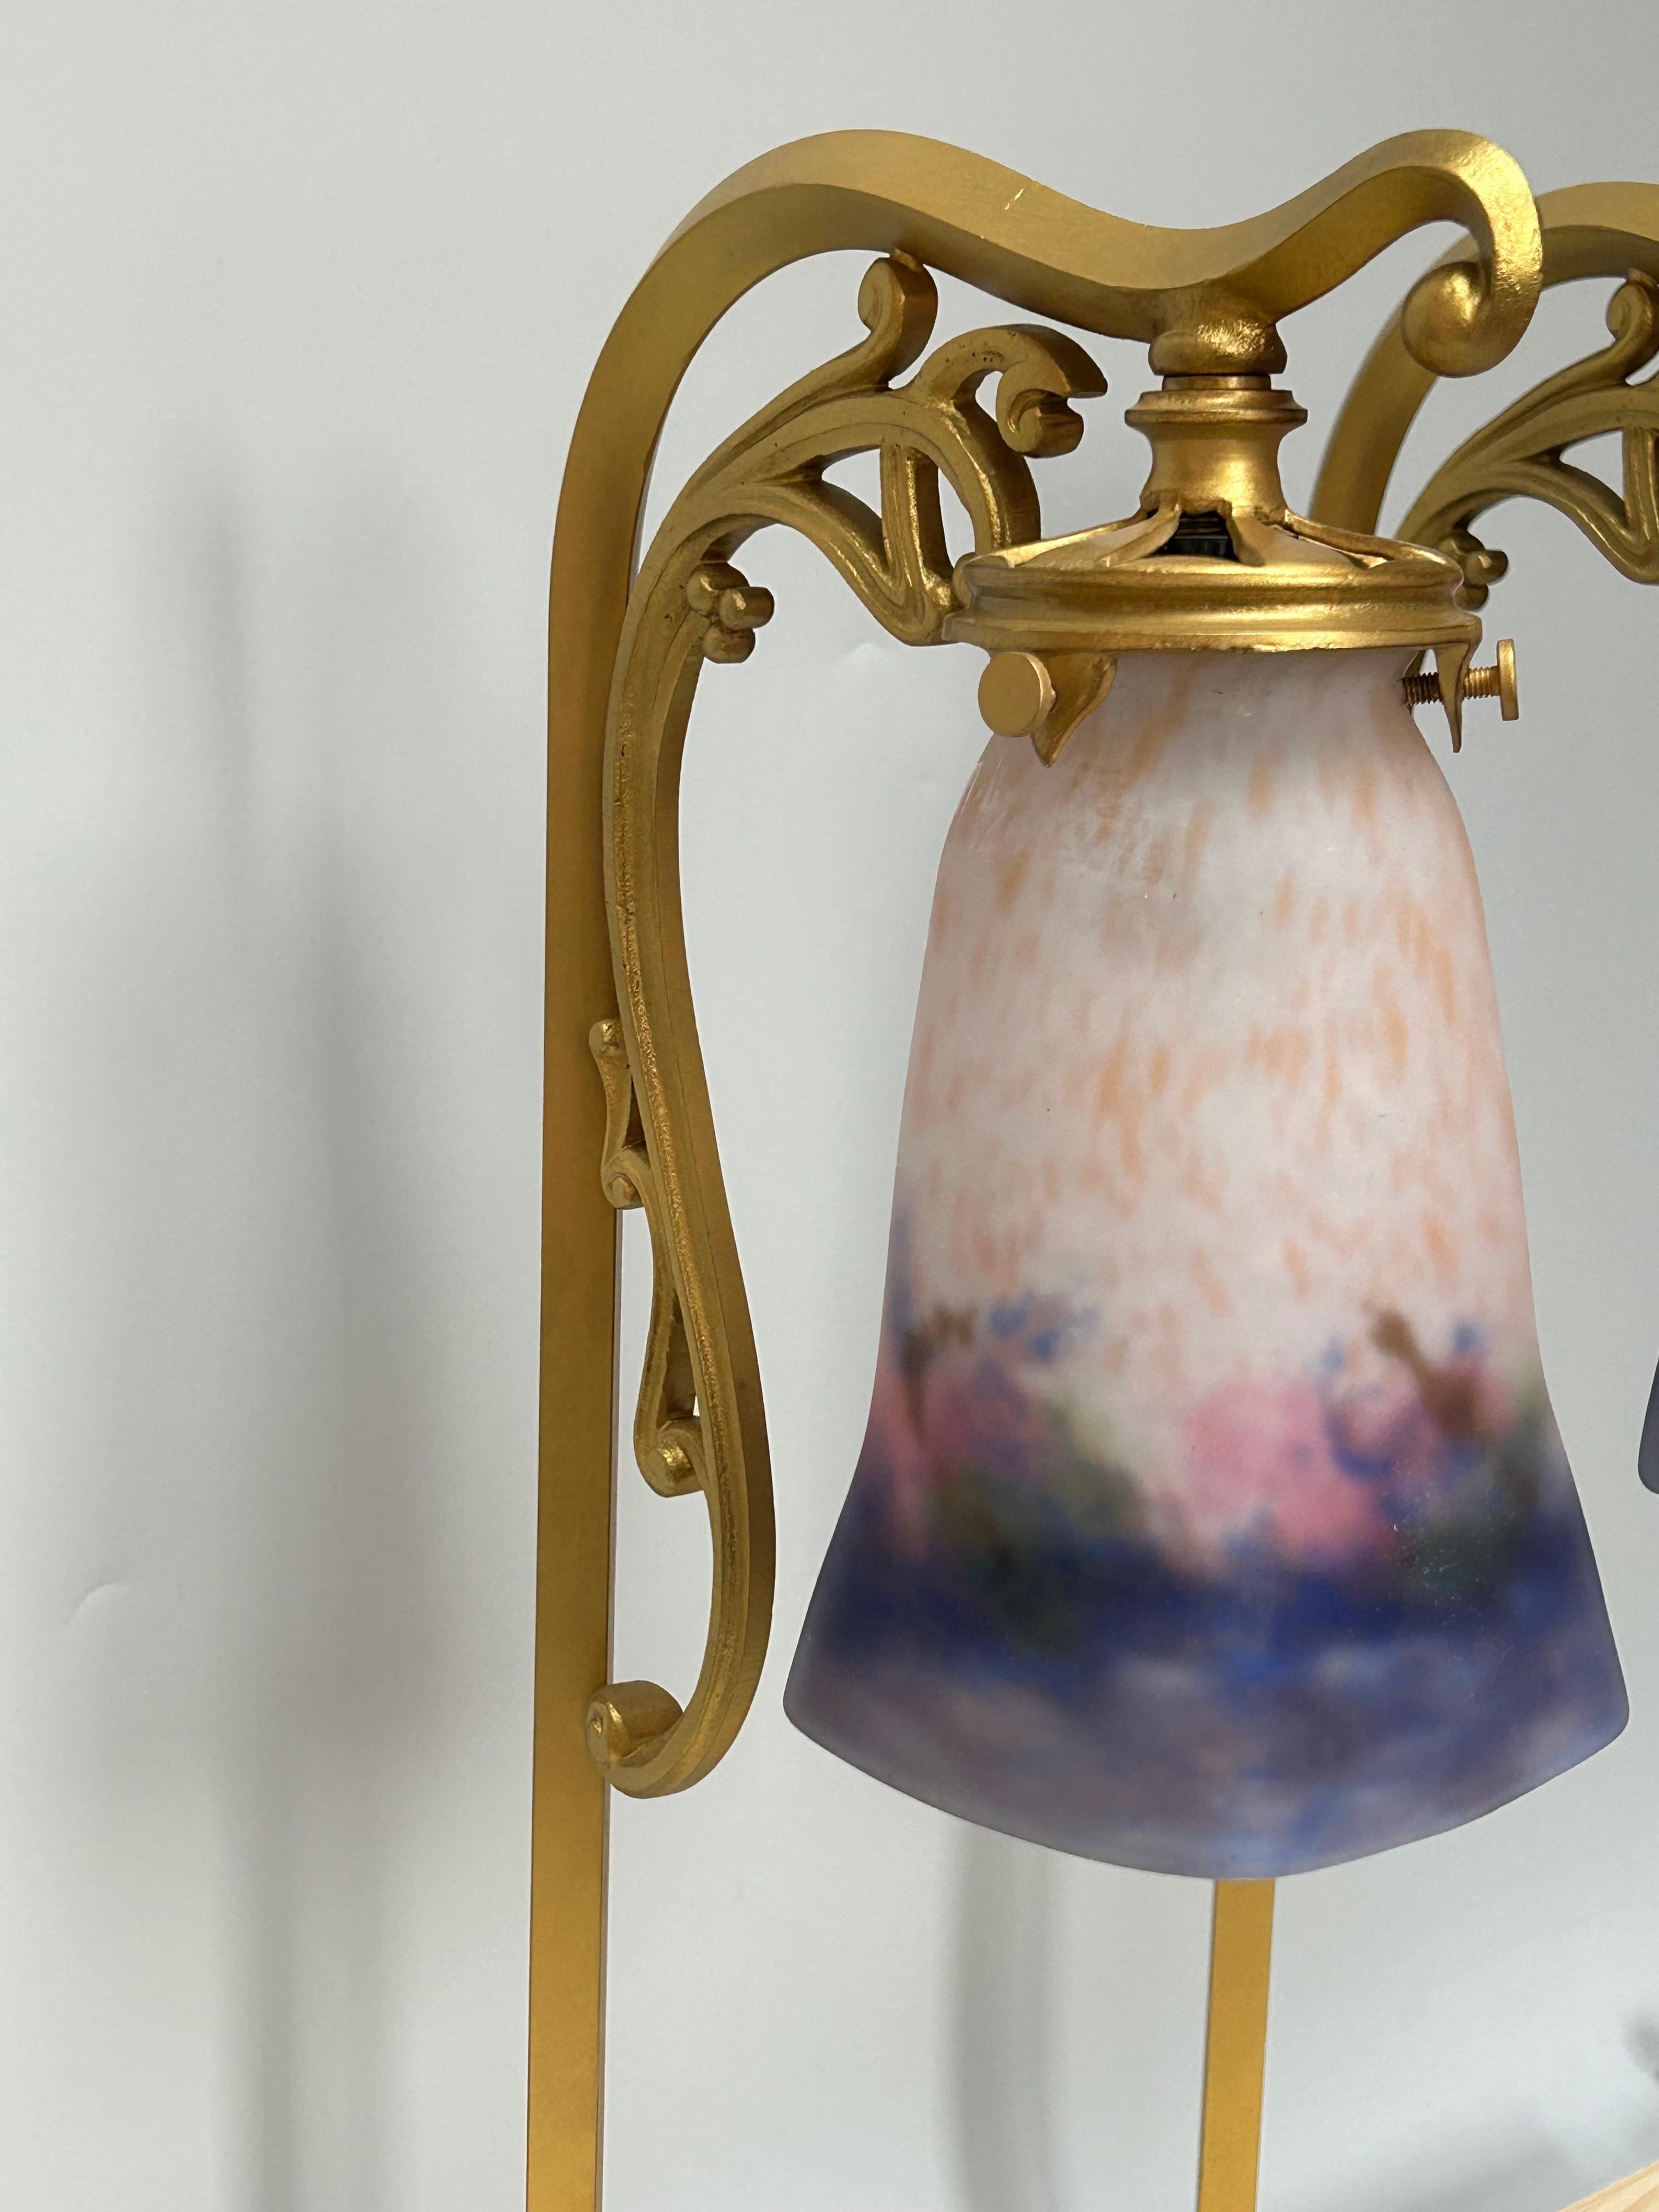 Pair of lamps around 1900 in bronze and gilded brass. Multi colored Muller Frères tulips.
Electrified in Perfect condition.
These lamps come from a Parisian brasserie from the beginning of the 20th century.
